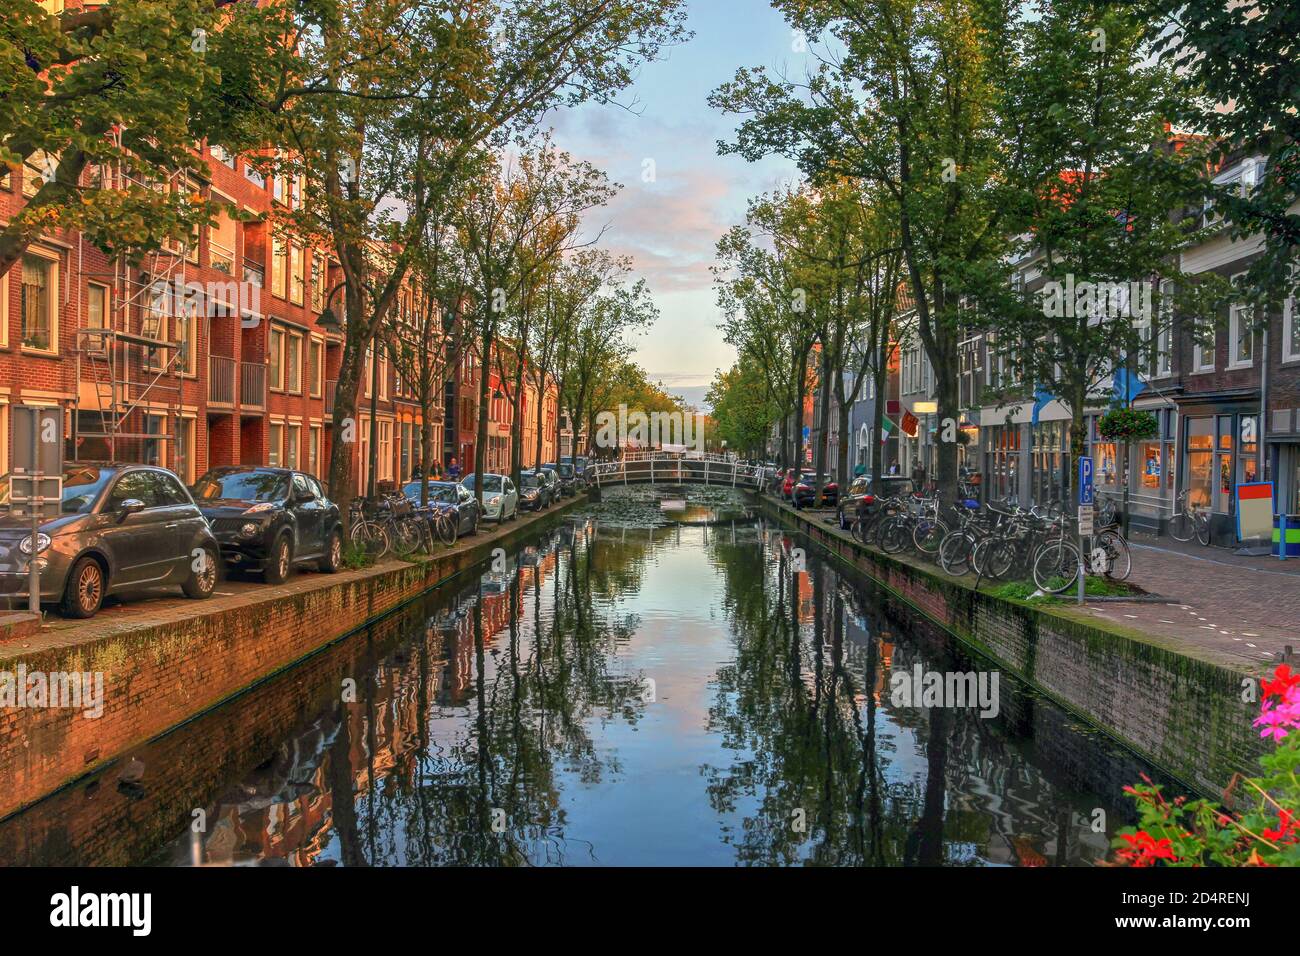 Evening canal scene in Delft, the Netherlands Stock Photo